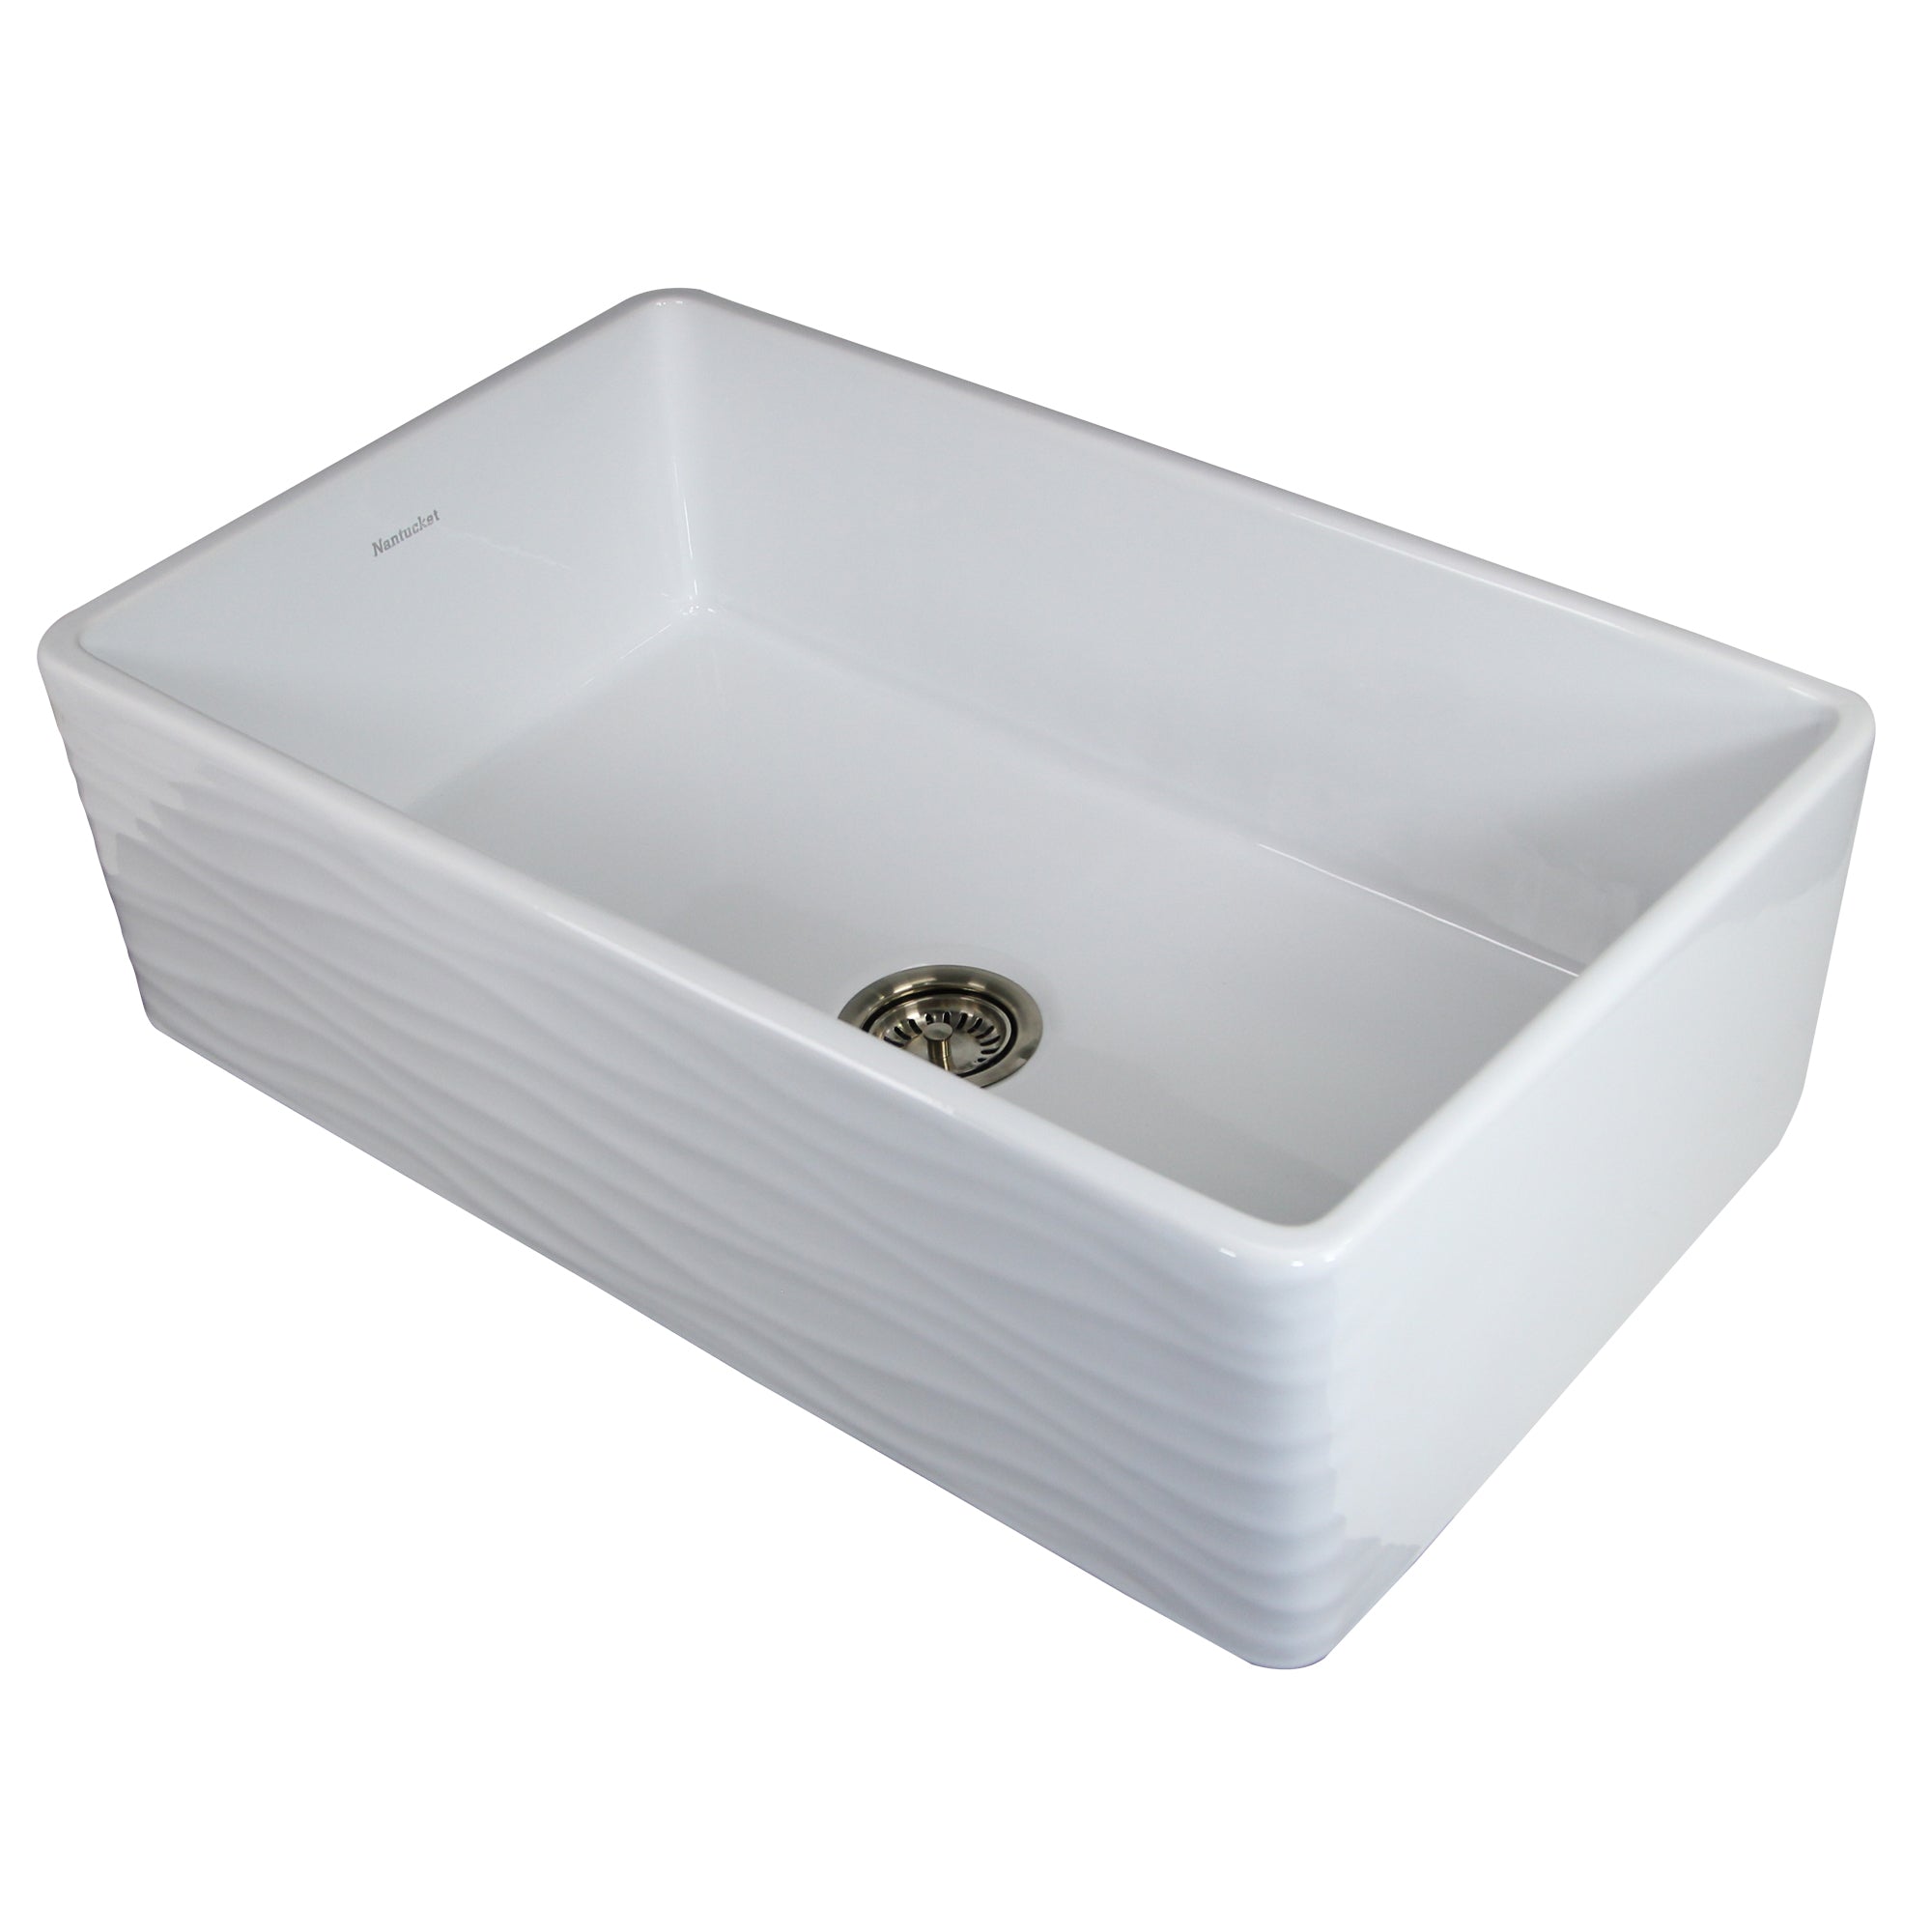 Nantucket Sinks Farmhouse Fireclay Sink with Wave Design Front ...